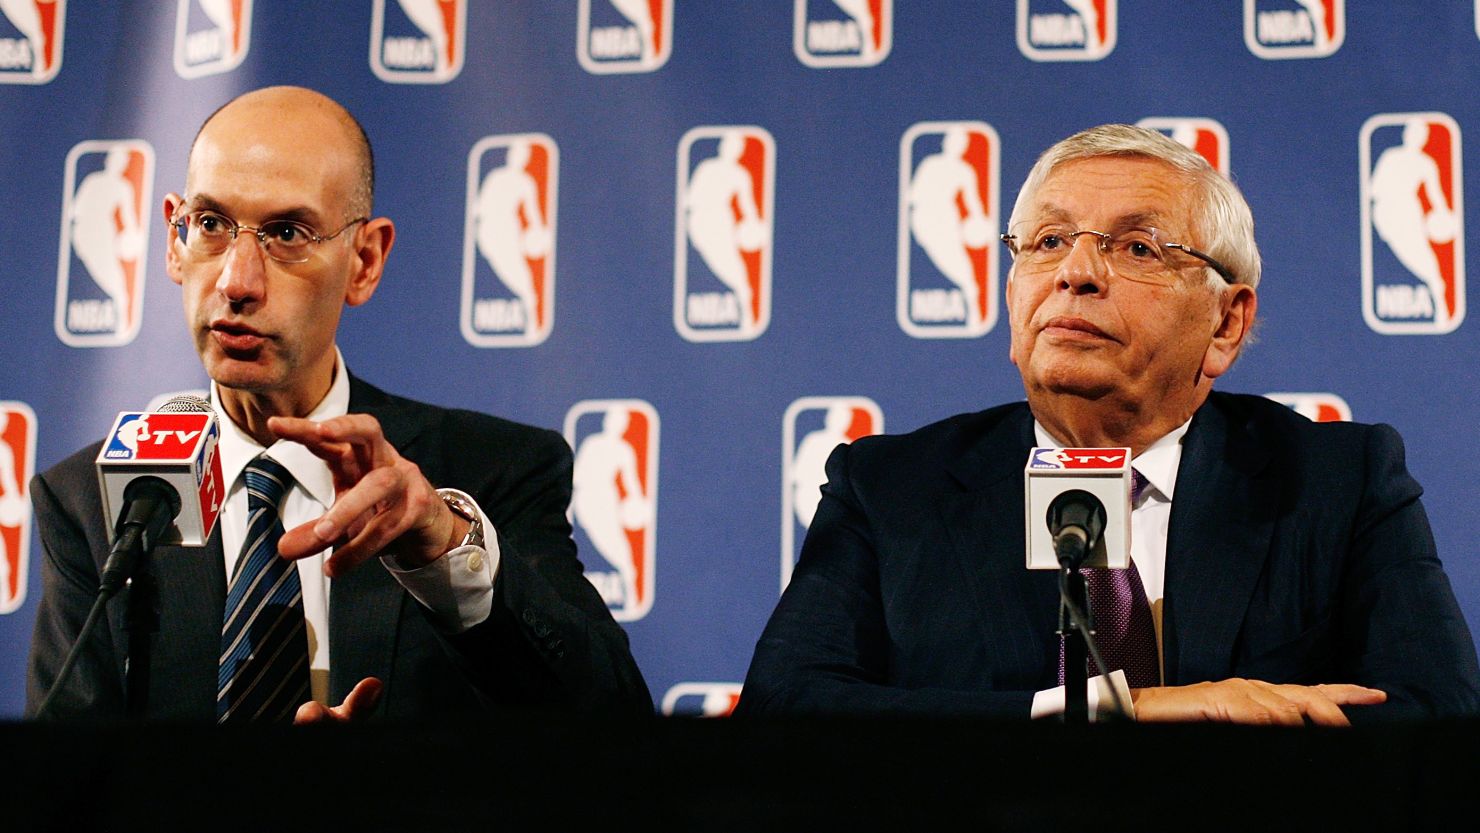 NBA Deputy Commissioner Adam Silver, left, and Commissioner David Stern speak at a press conference after NBA labor negotiations in New York on Tuesday, October 4, 2011.